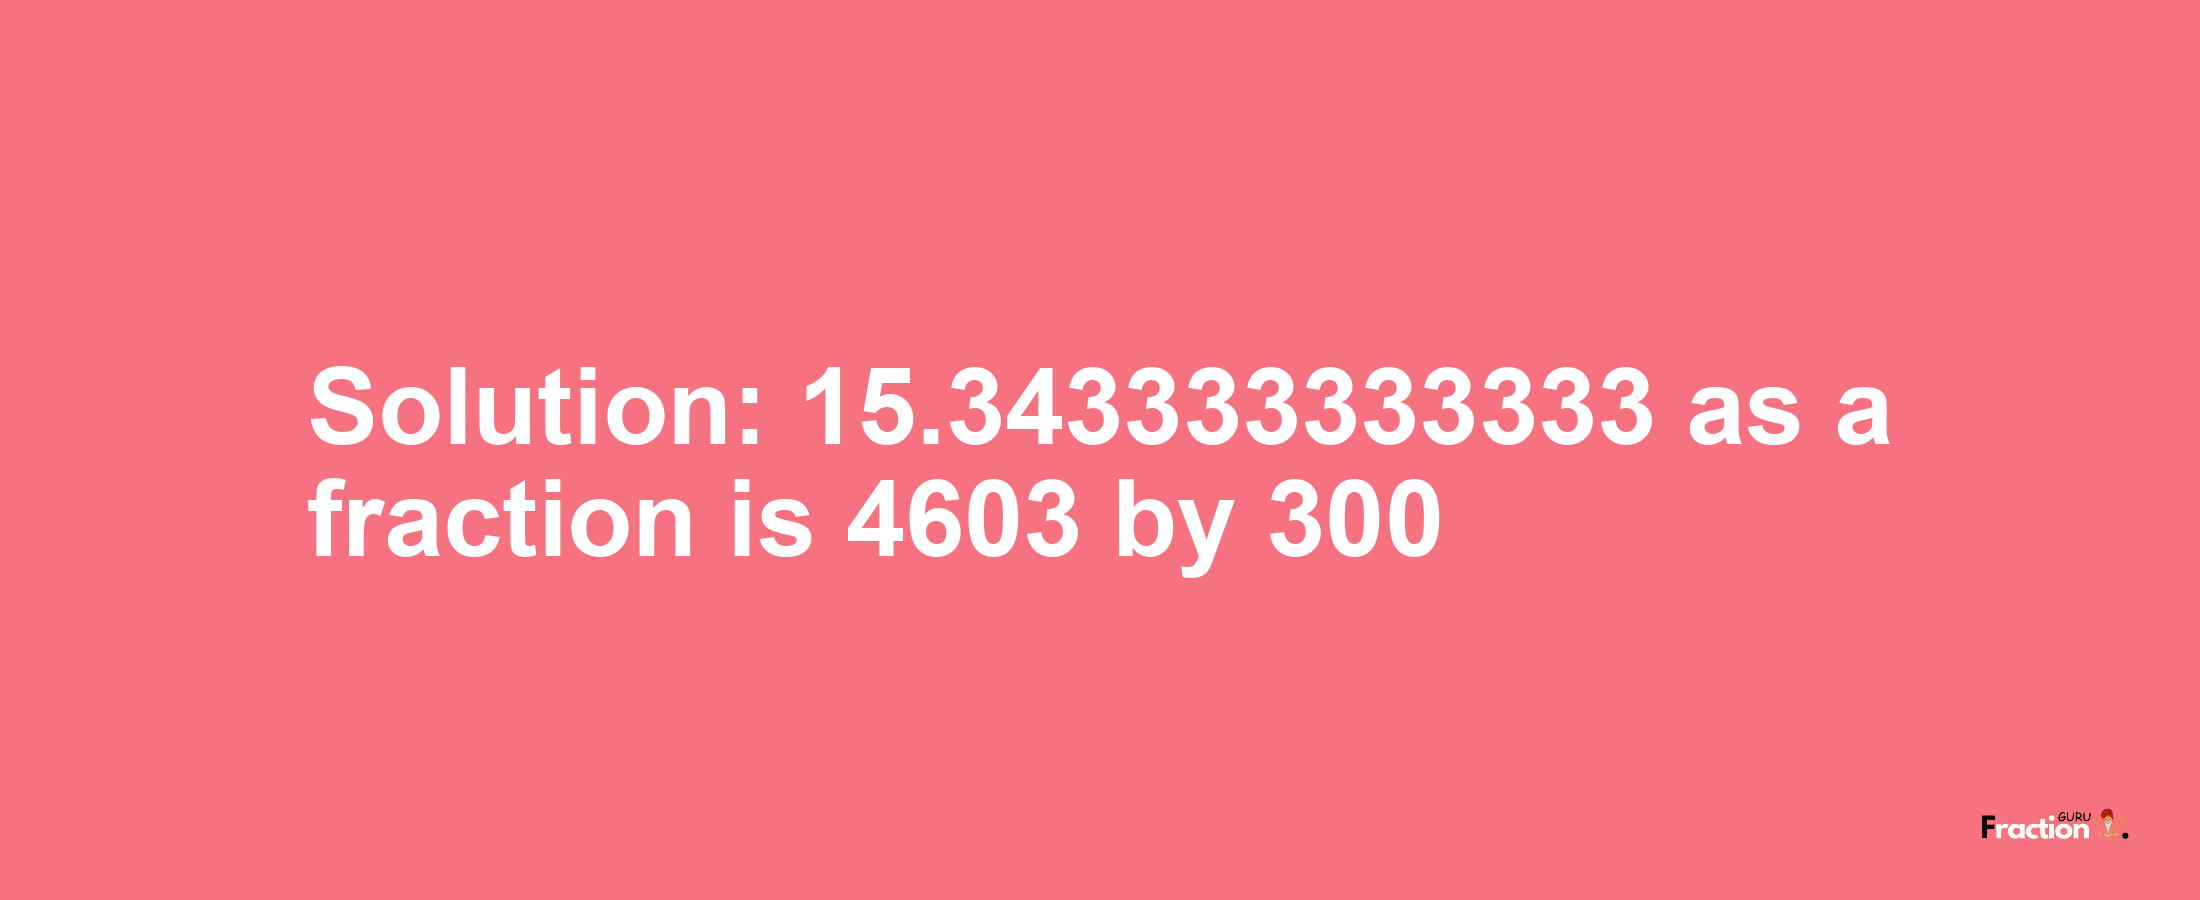 Solution:15.343333333333 as a fraction is 4603/300